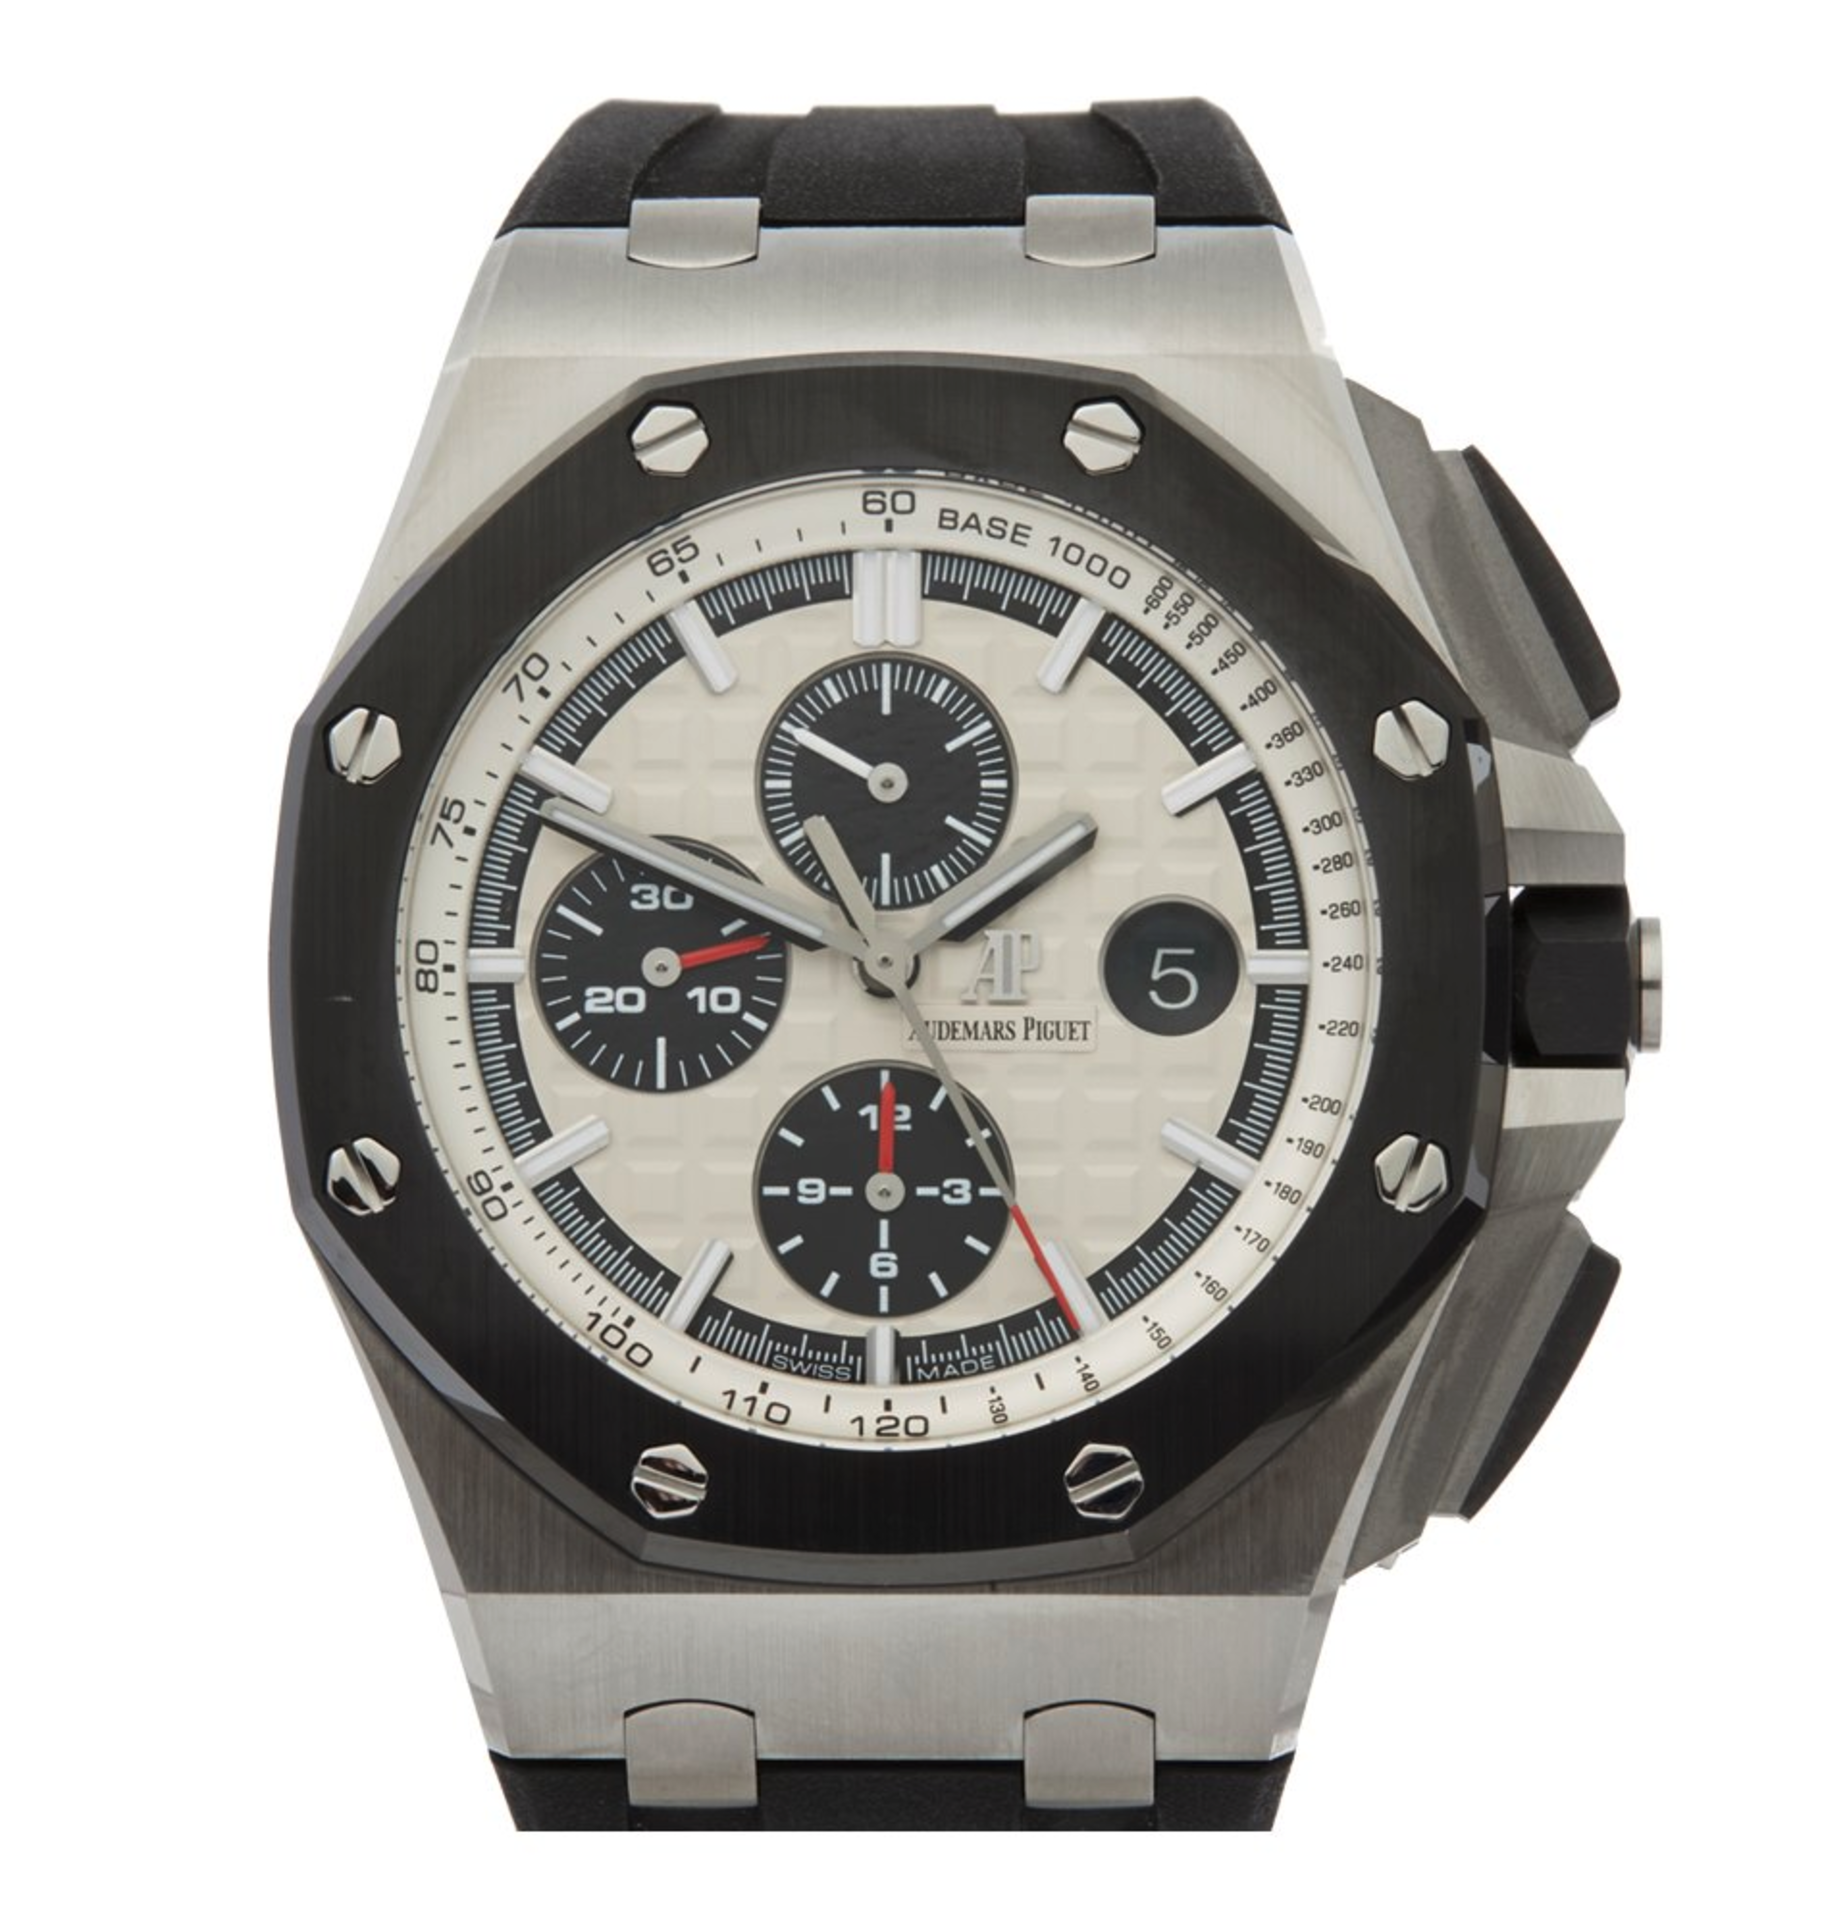 Audemars Piguet Royal Oak Offshore Stainless Steel - 26400SO.OO.A002CA.01 - Image 5 of 8